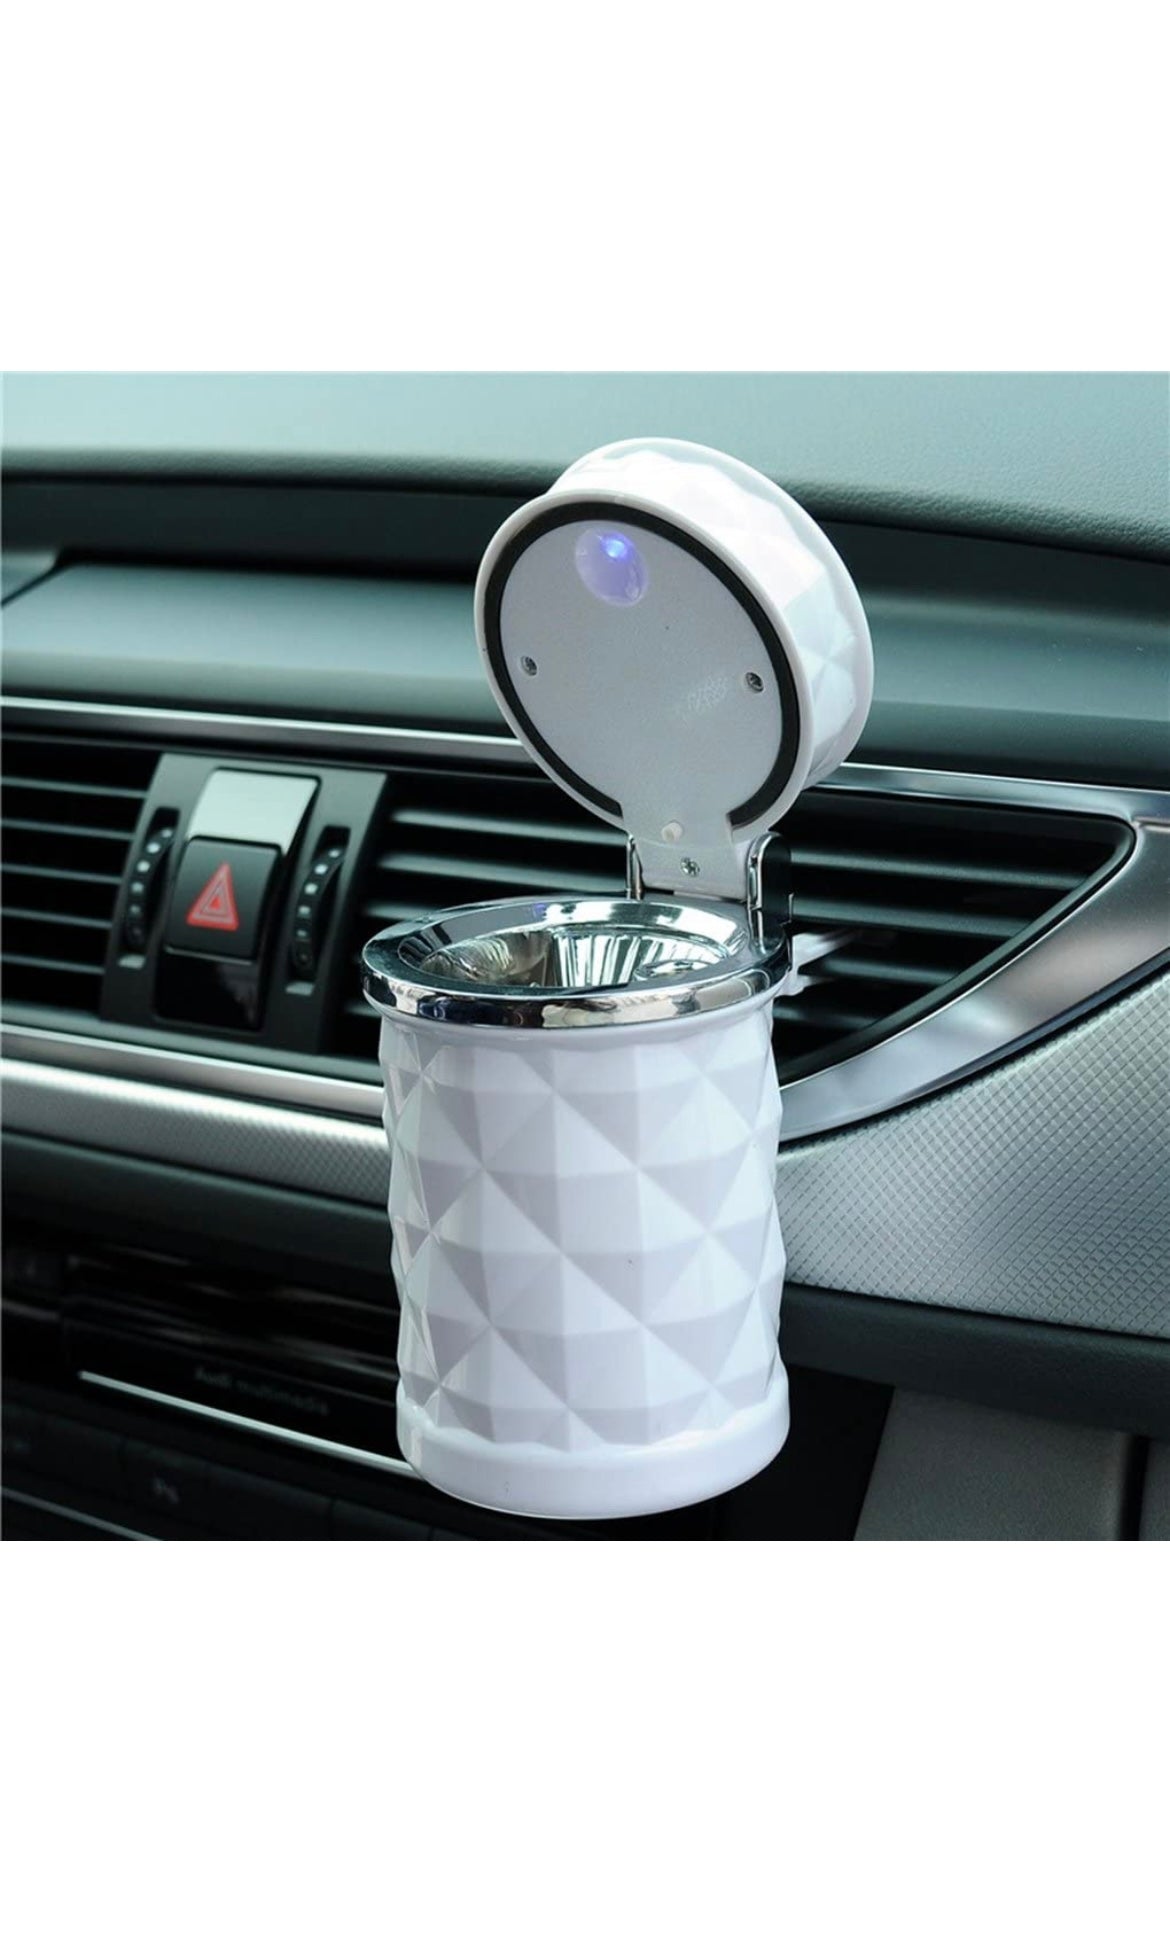 TrexNYC Car Ashtray with Blue LED Light and Portable Ashtray Design - Ideal for Car, Home, and Office